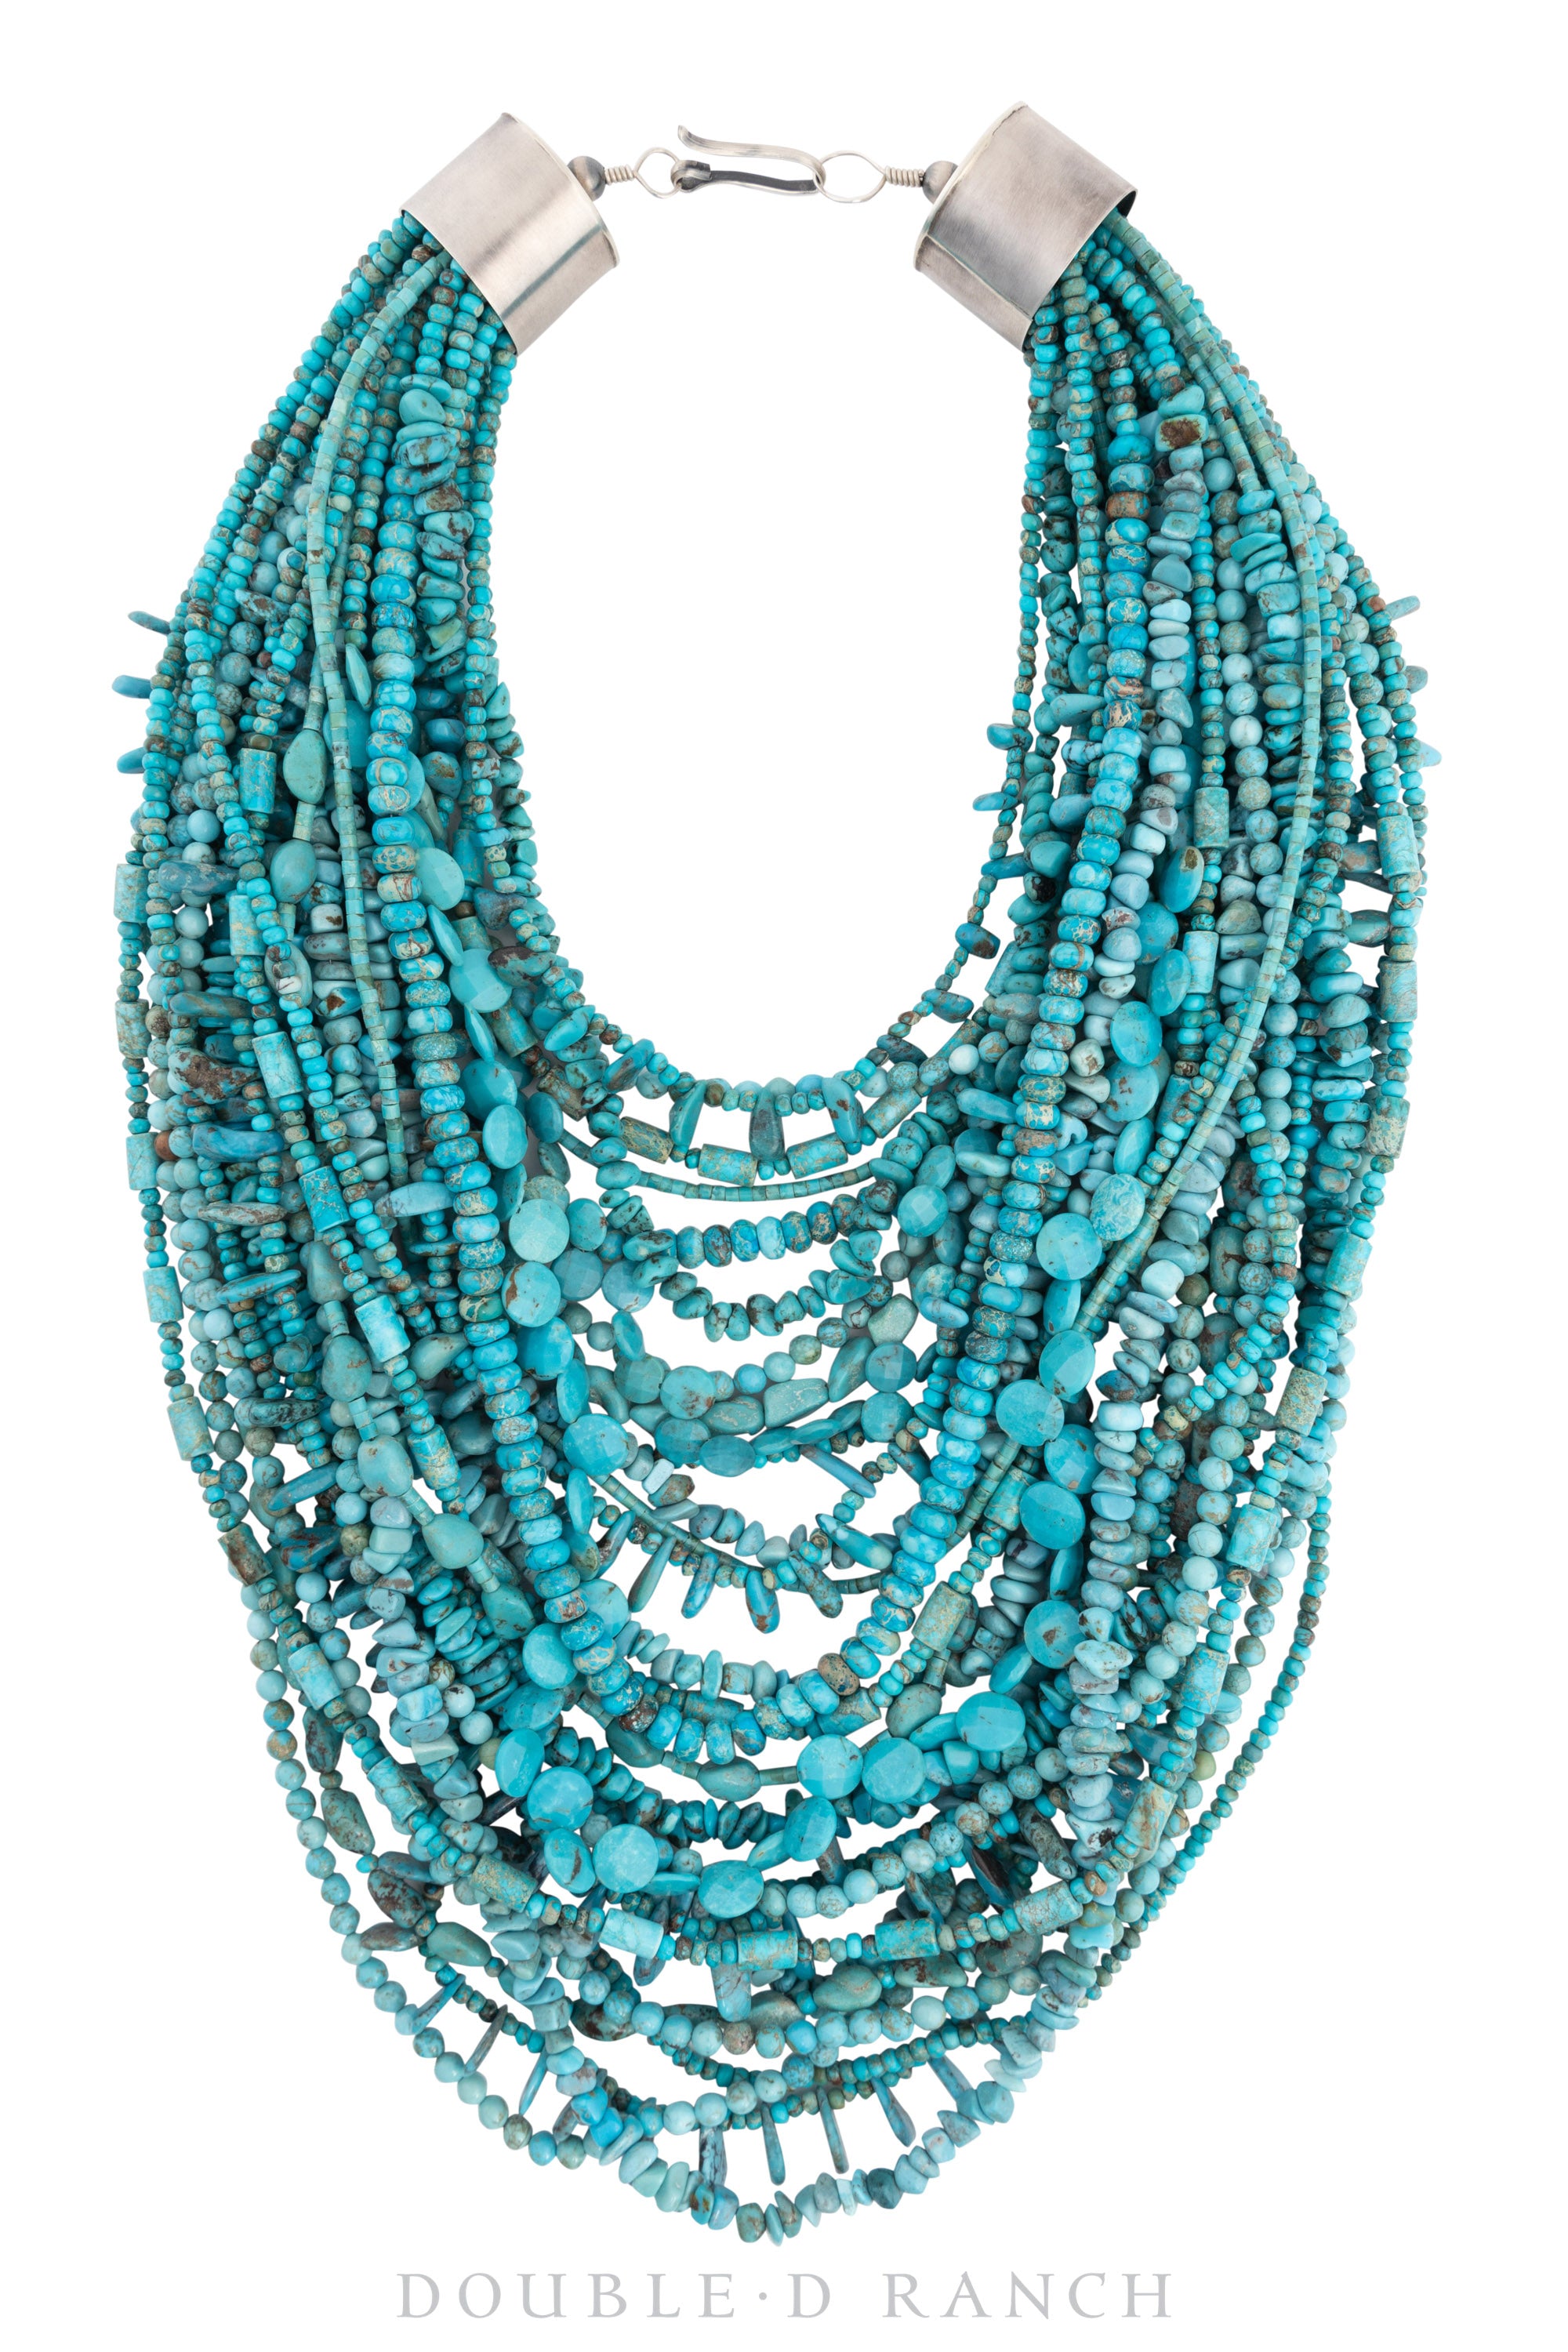 Necklace, Natural Stone, Turquoise, 30 Strand, Met Gala Style, Hallmark, Contemporary, 3112